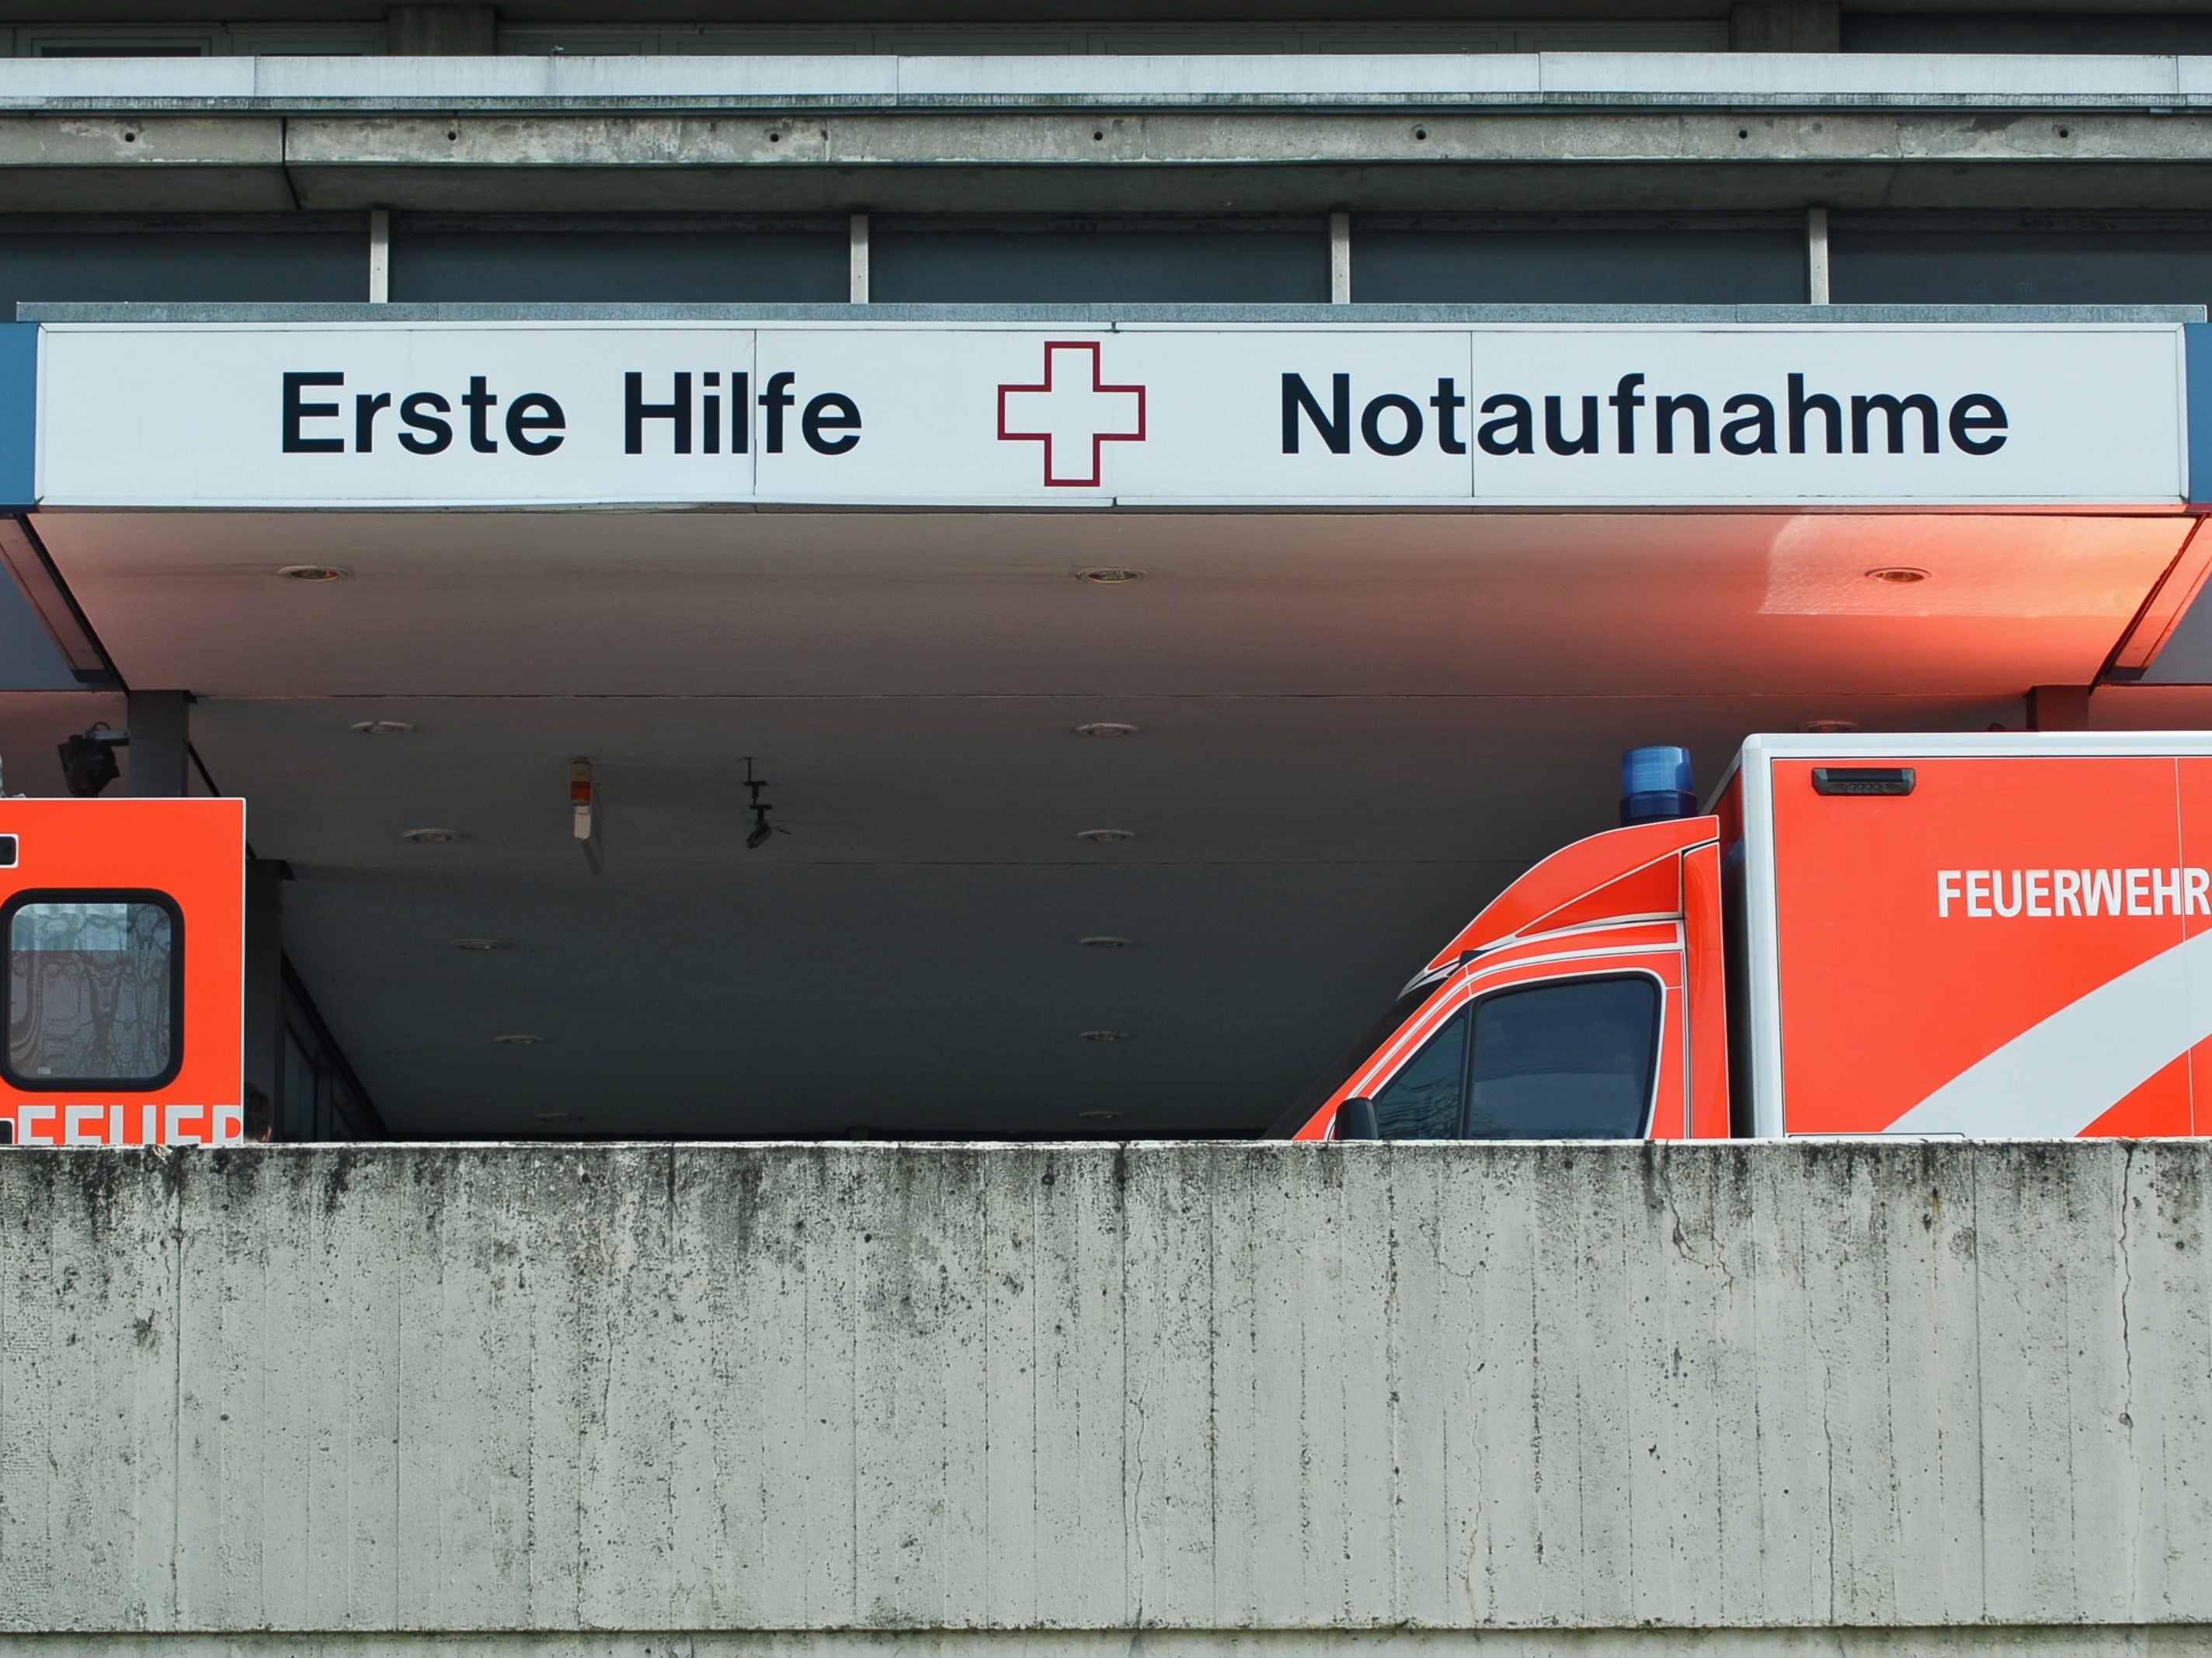 A hack on a German hospital caused emergency patients to be rerouted to other hospitals